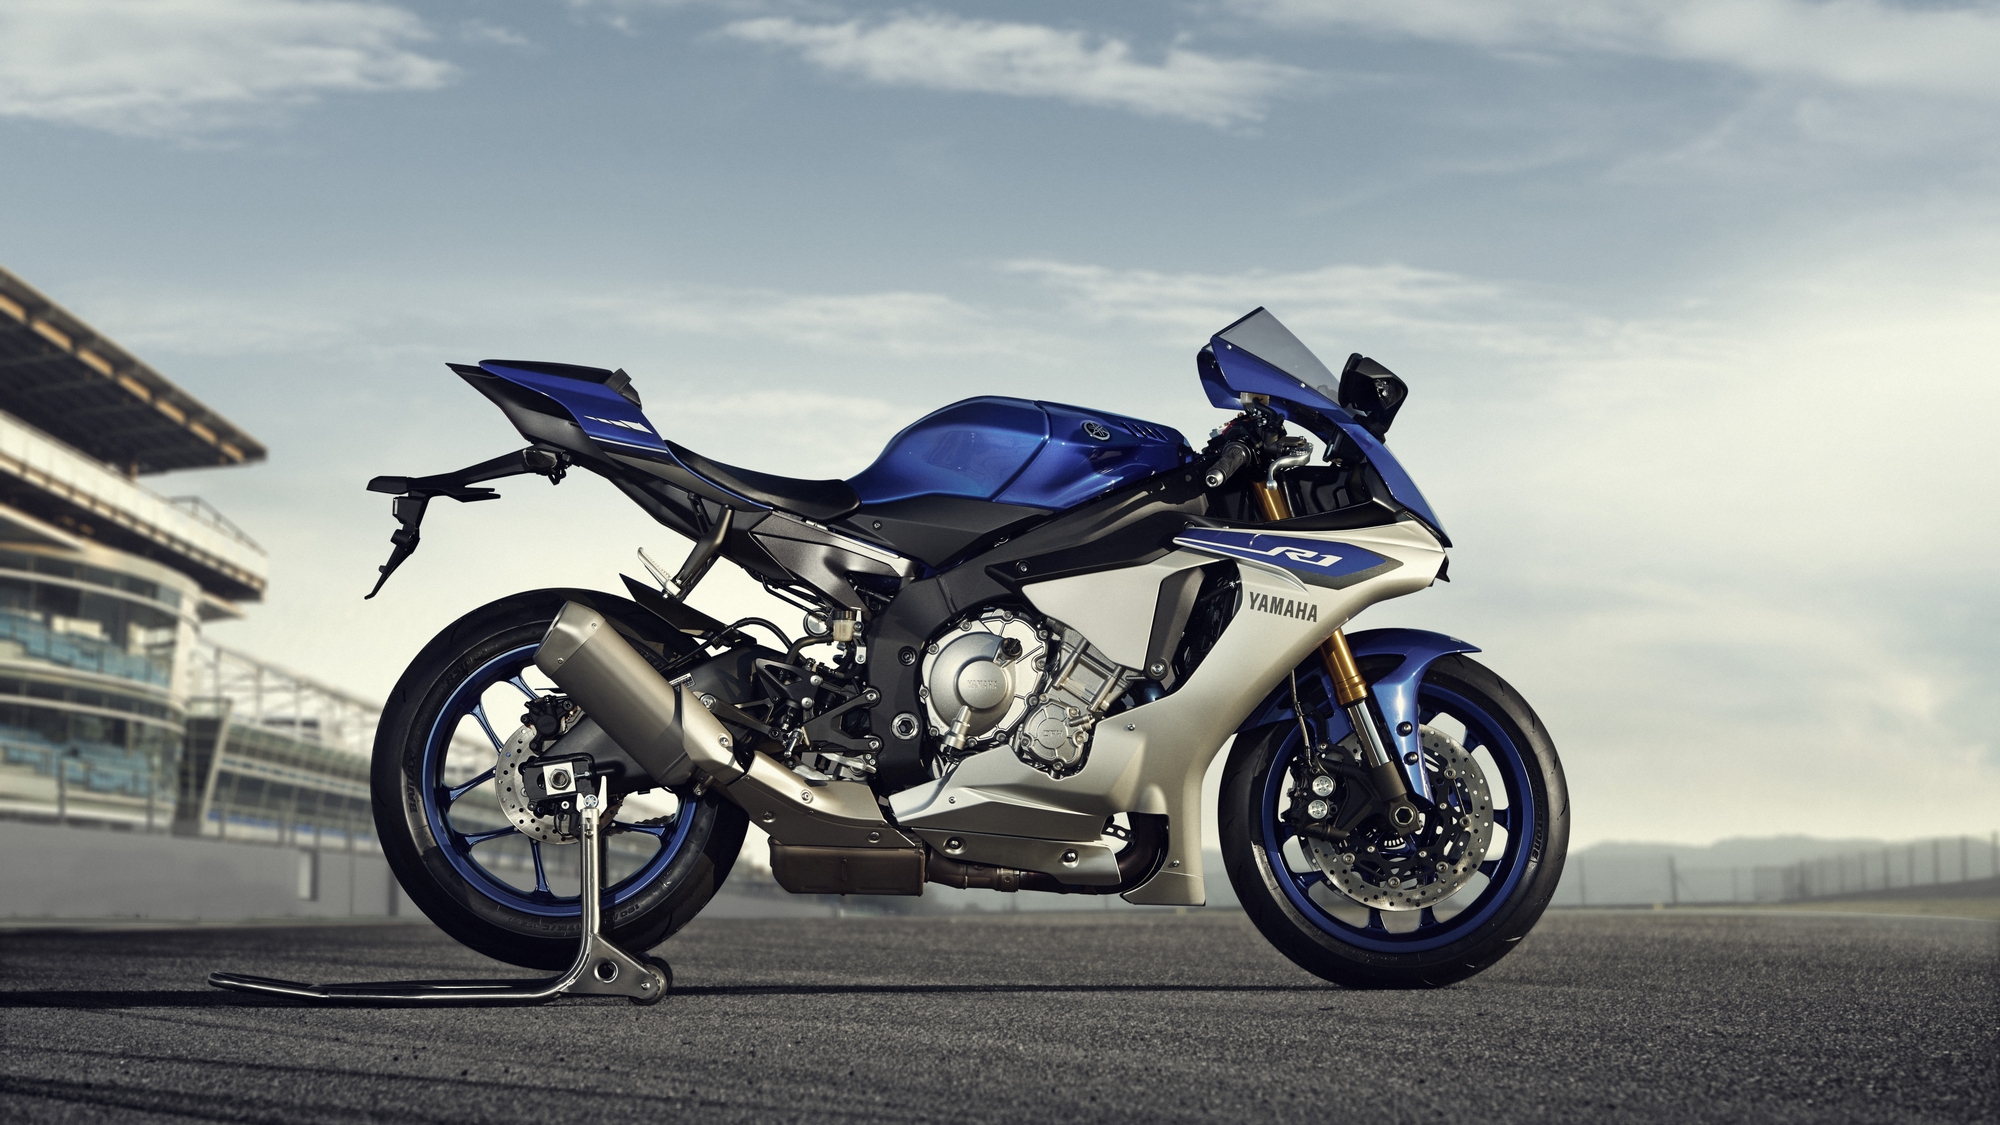 2015 Yamaha YZF-R1 Studio and Action Shots Show More Superbike Goodness ...